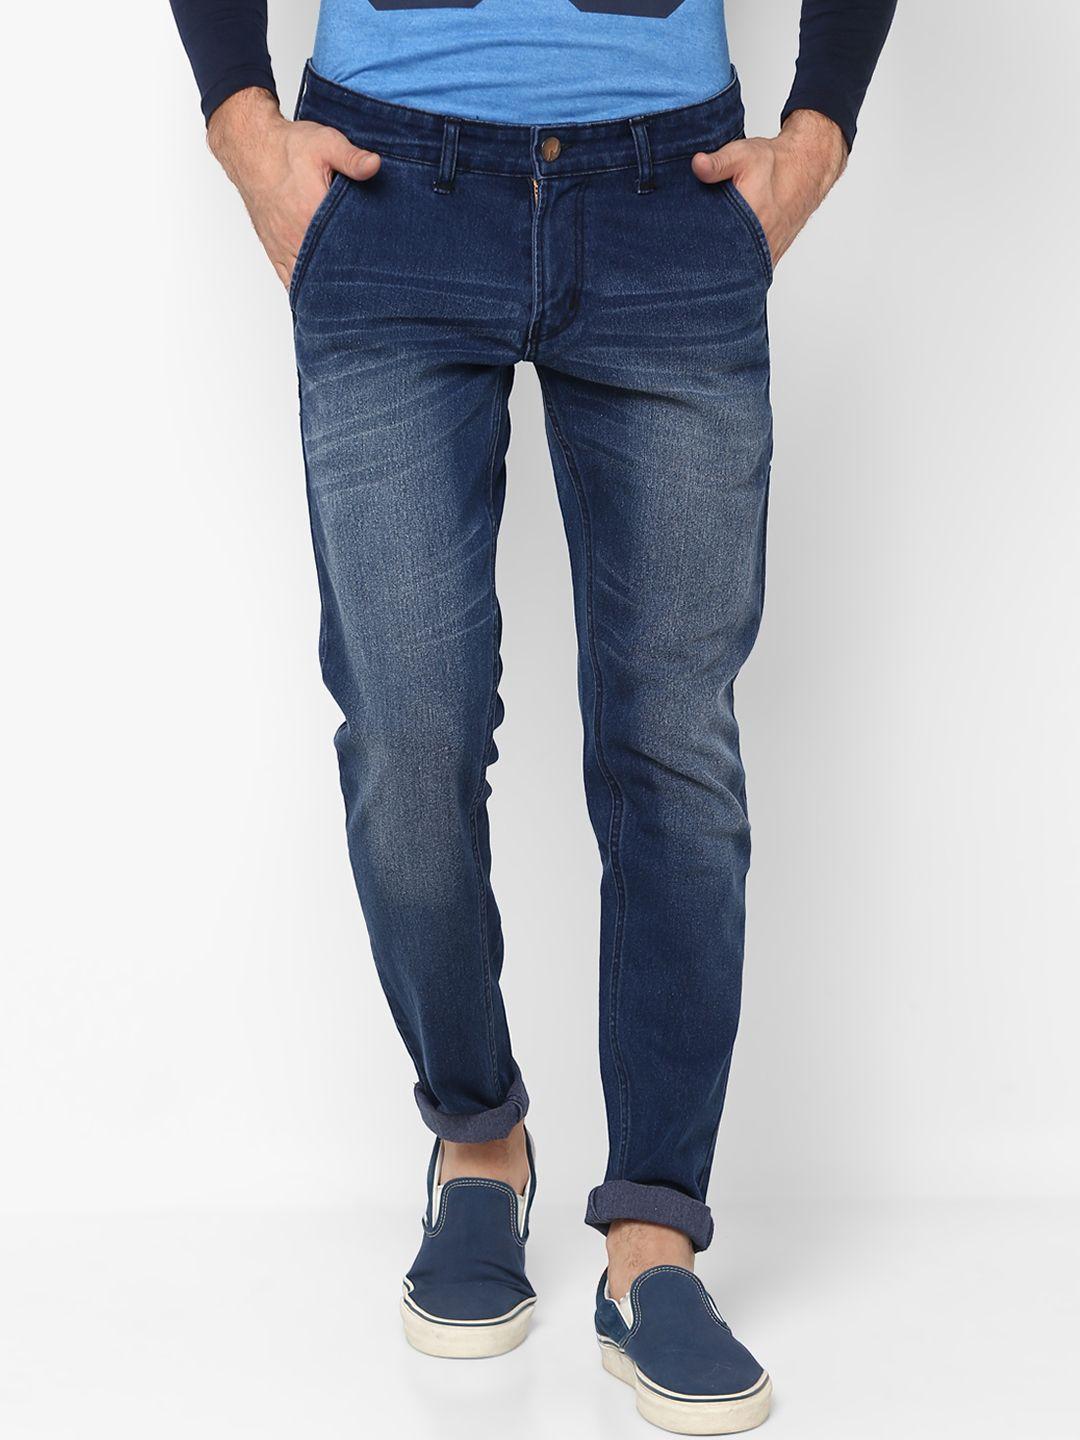 urbano-fashion-men-blue-slim-fit-mid-rise-clean-look-stretchable-jeans